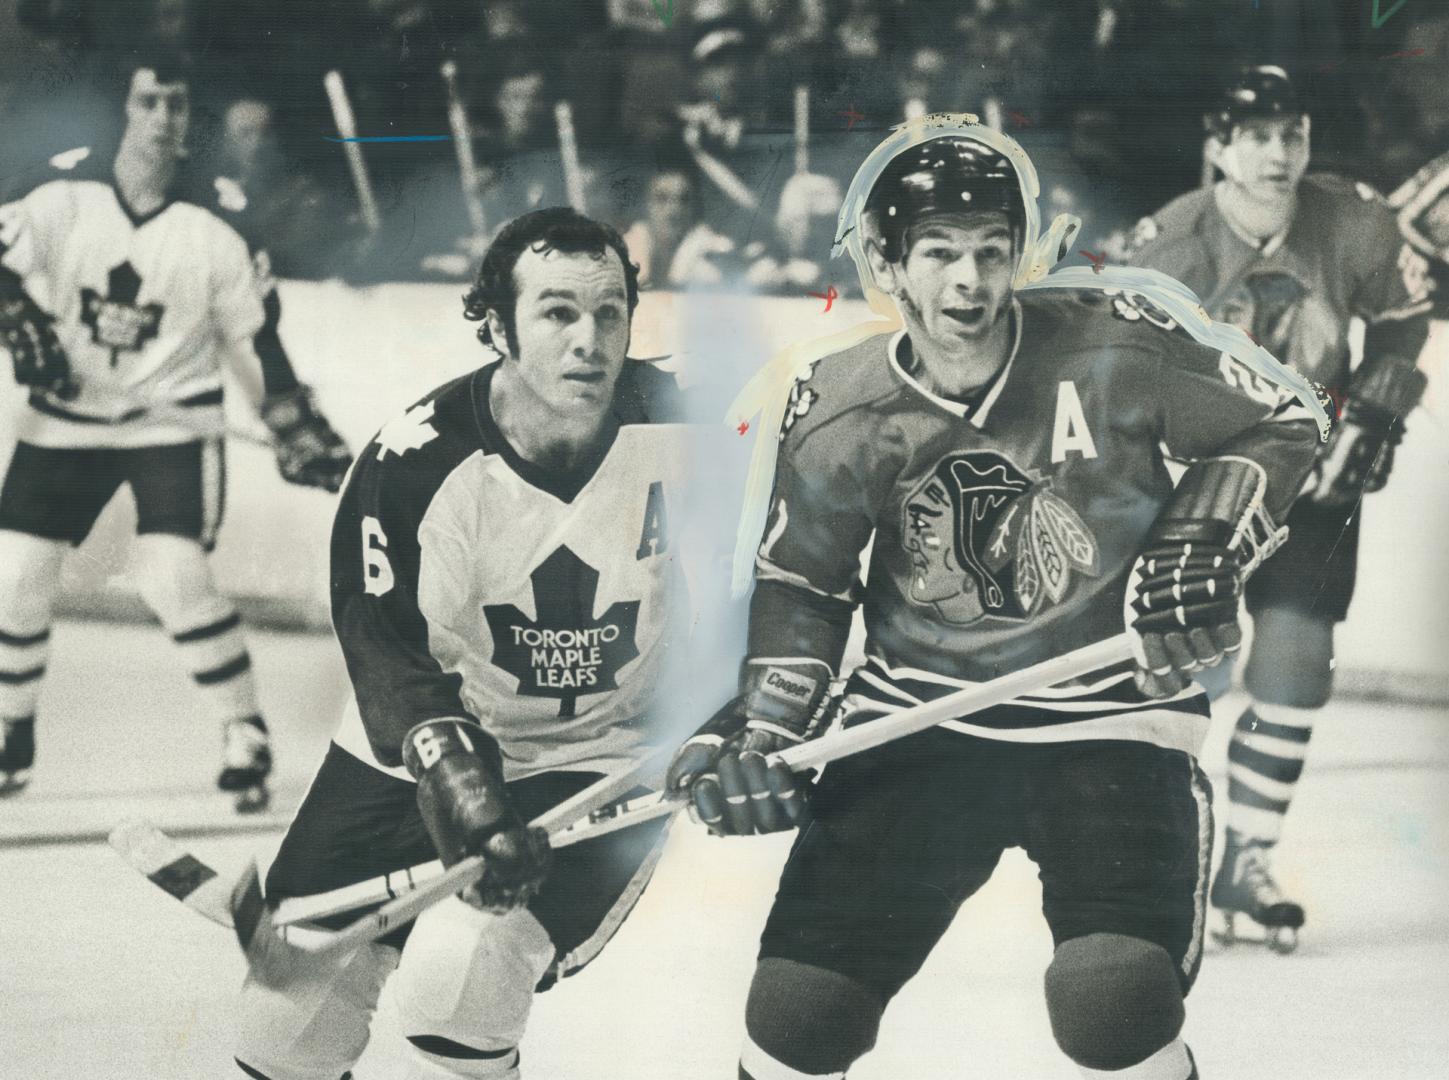 Stan Mikita (right) was tabbed as being washing up after last season